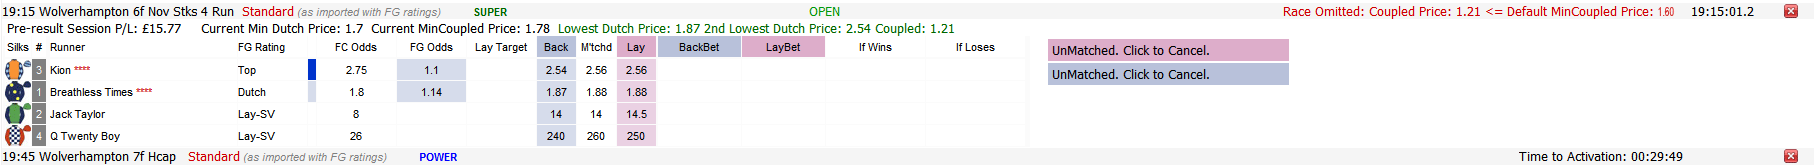 Min Coupled Odds Not Matched